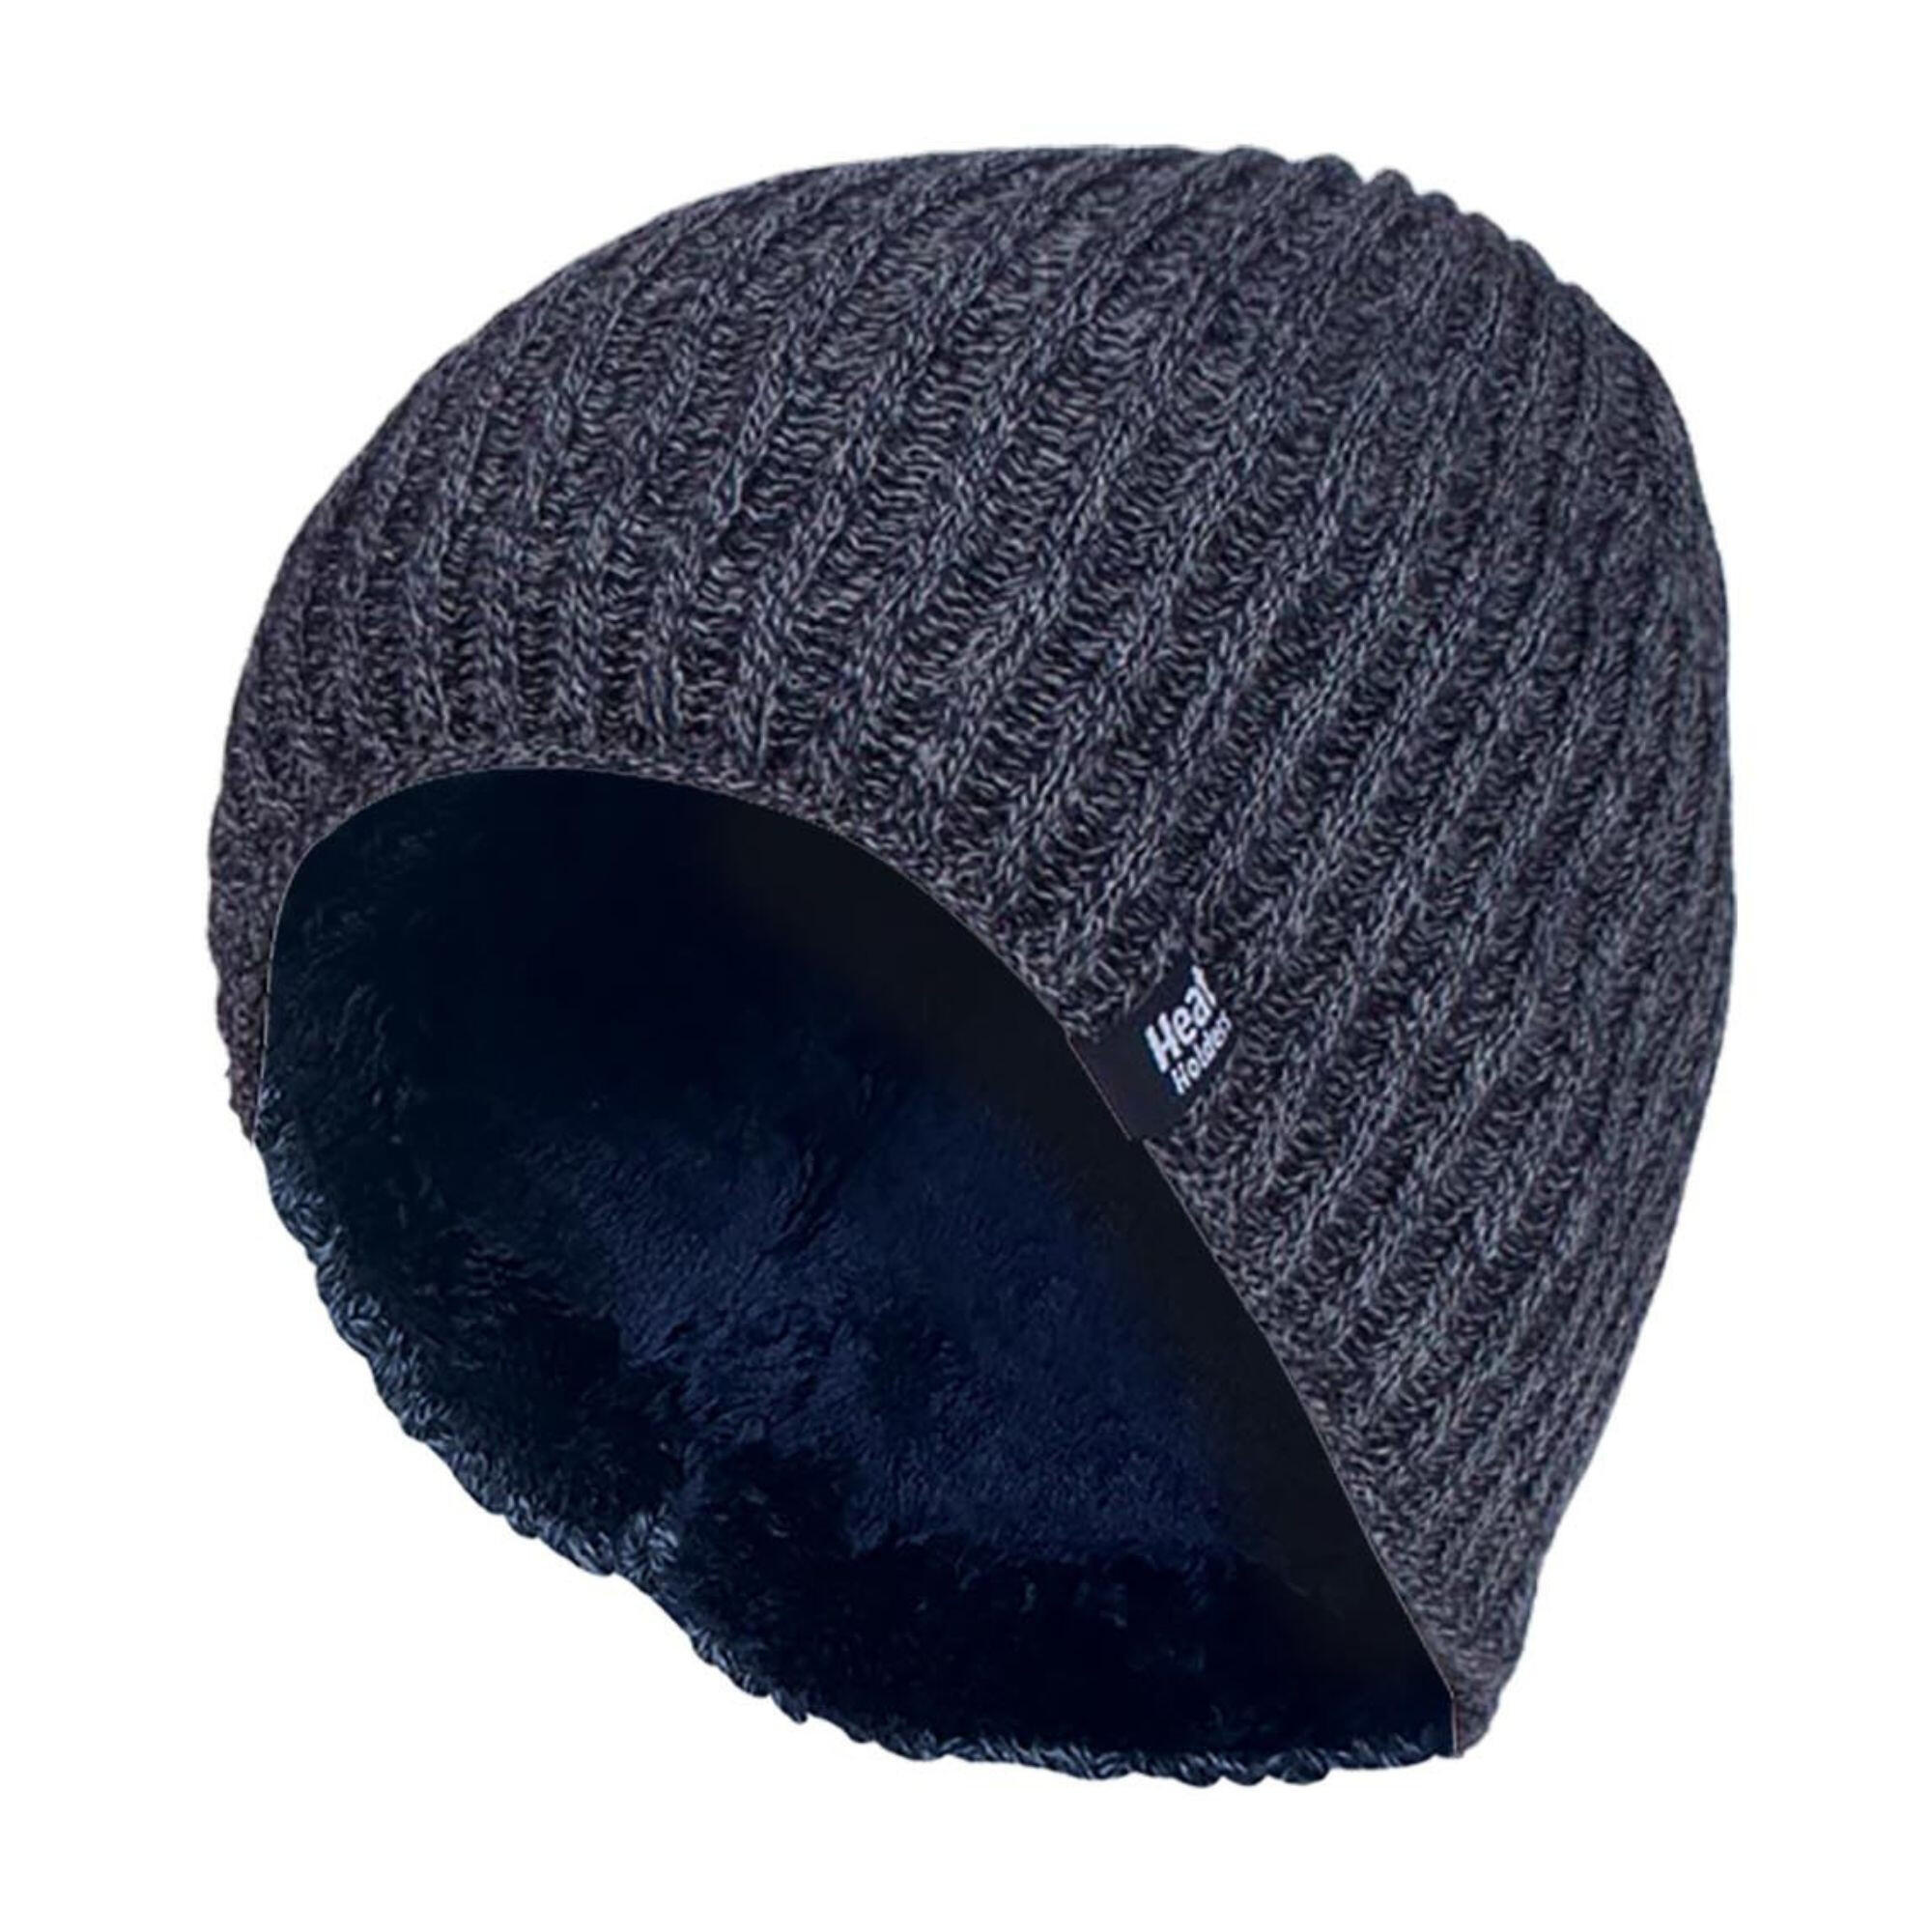 HEAT HOLDERS Mens Fleece Lined Thermal Winter Knitted Beanie Hat